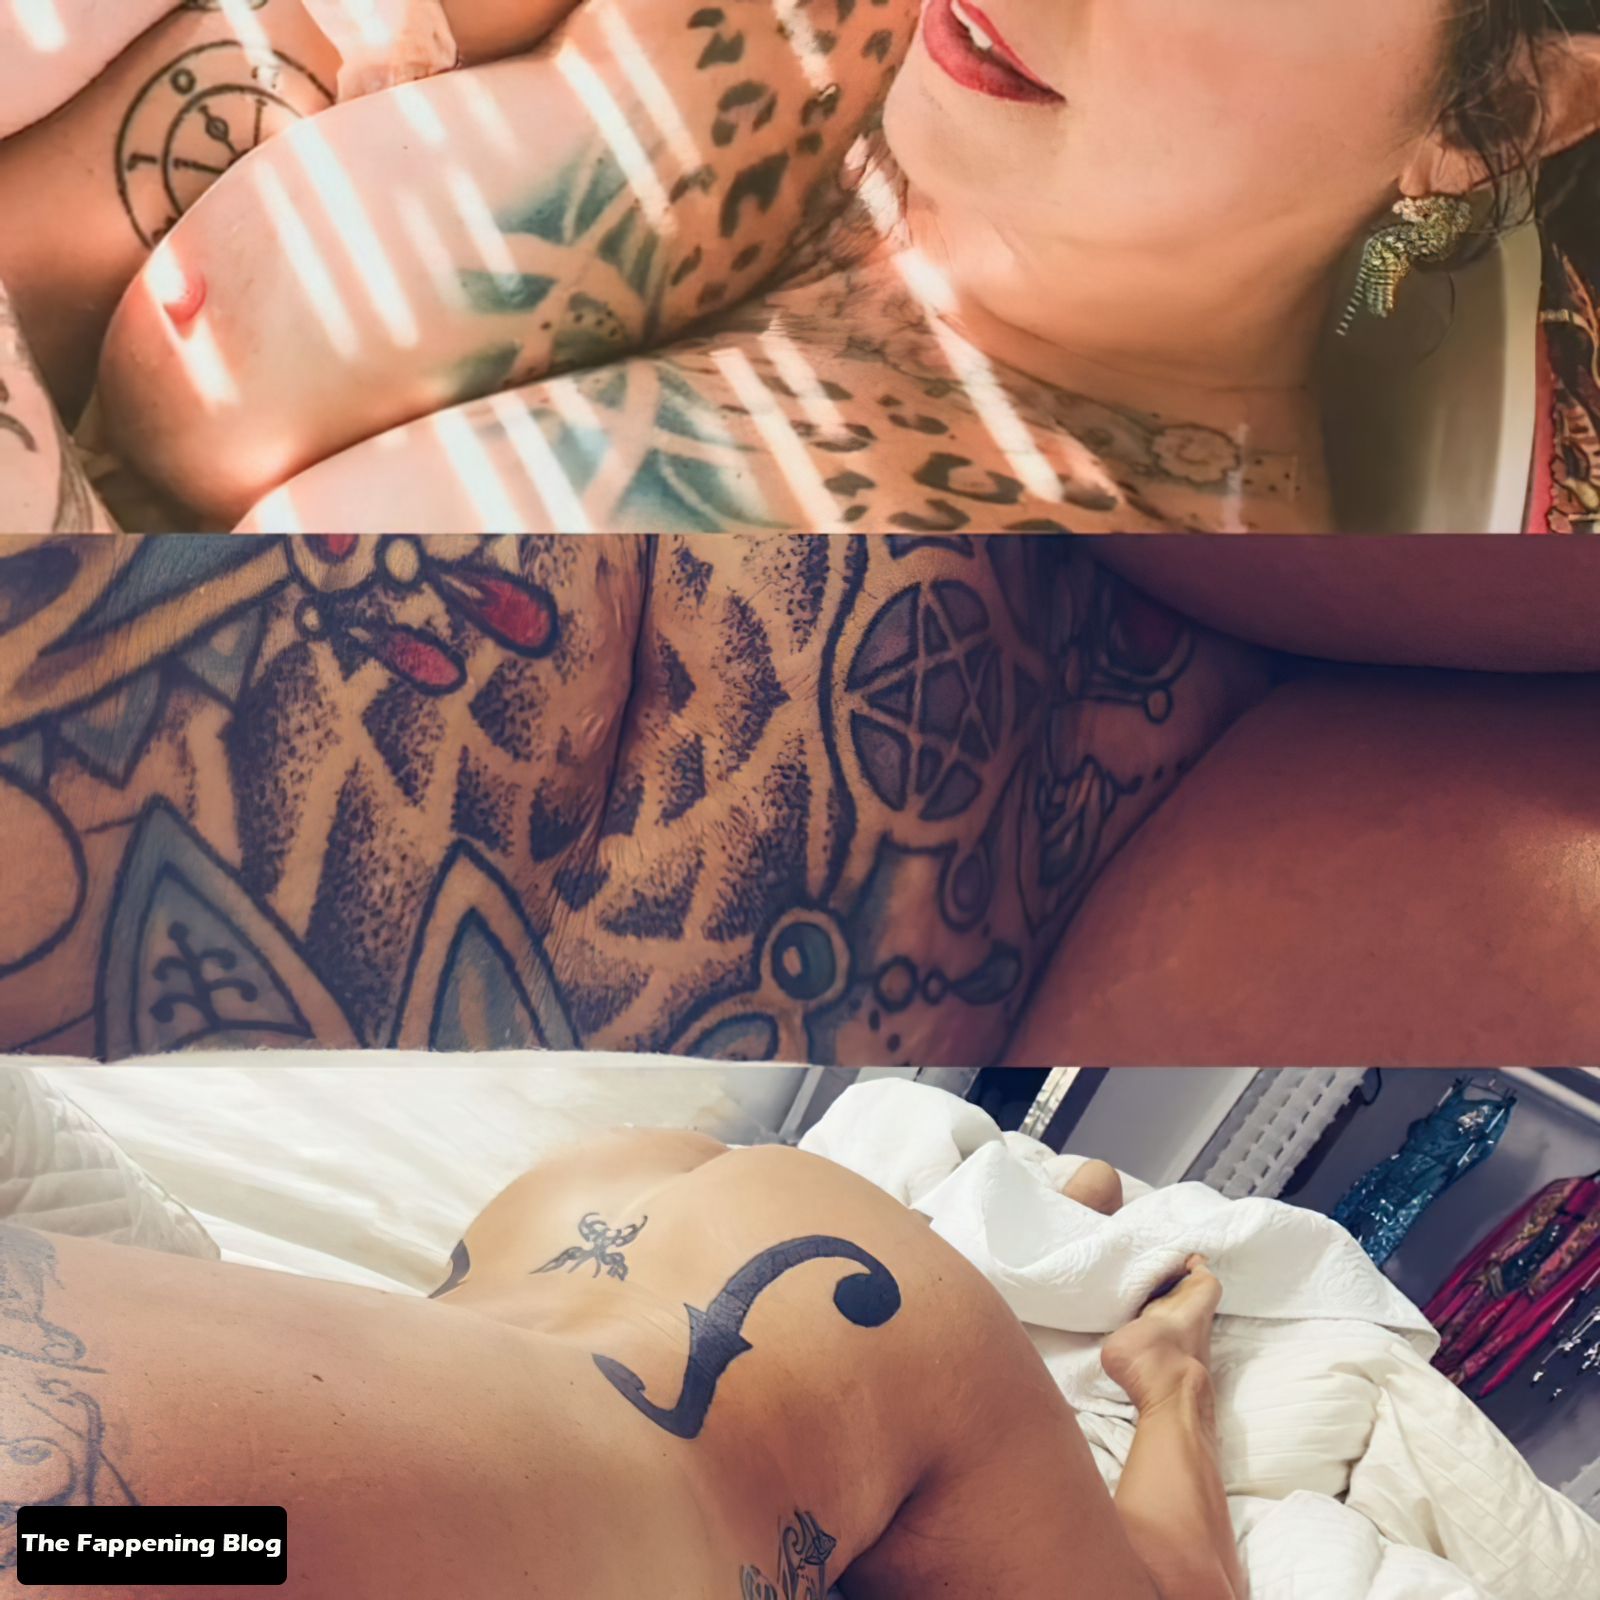 Danielle colby topless pics